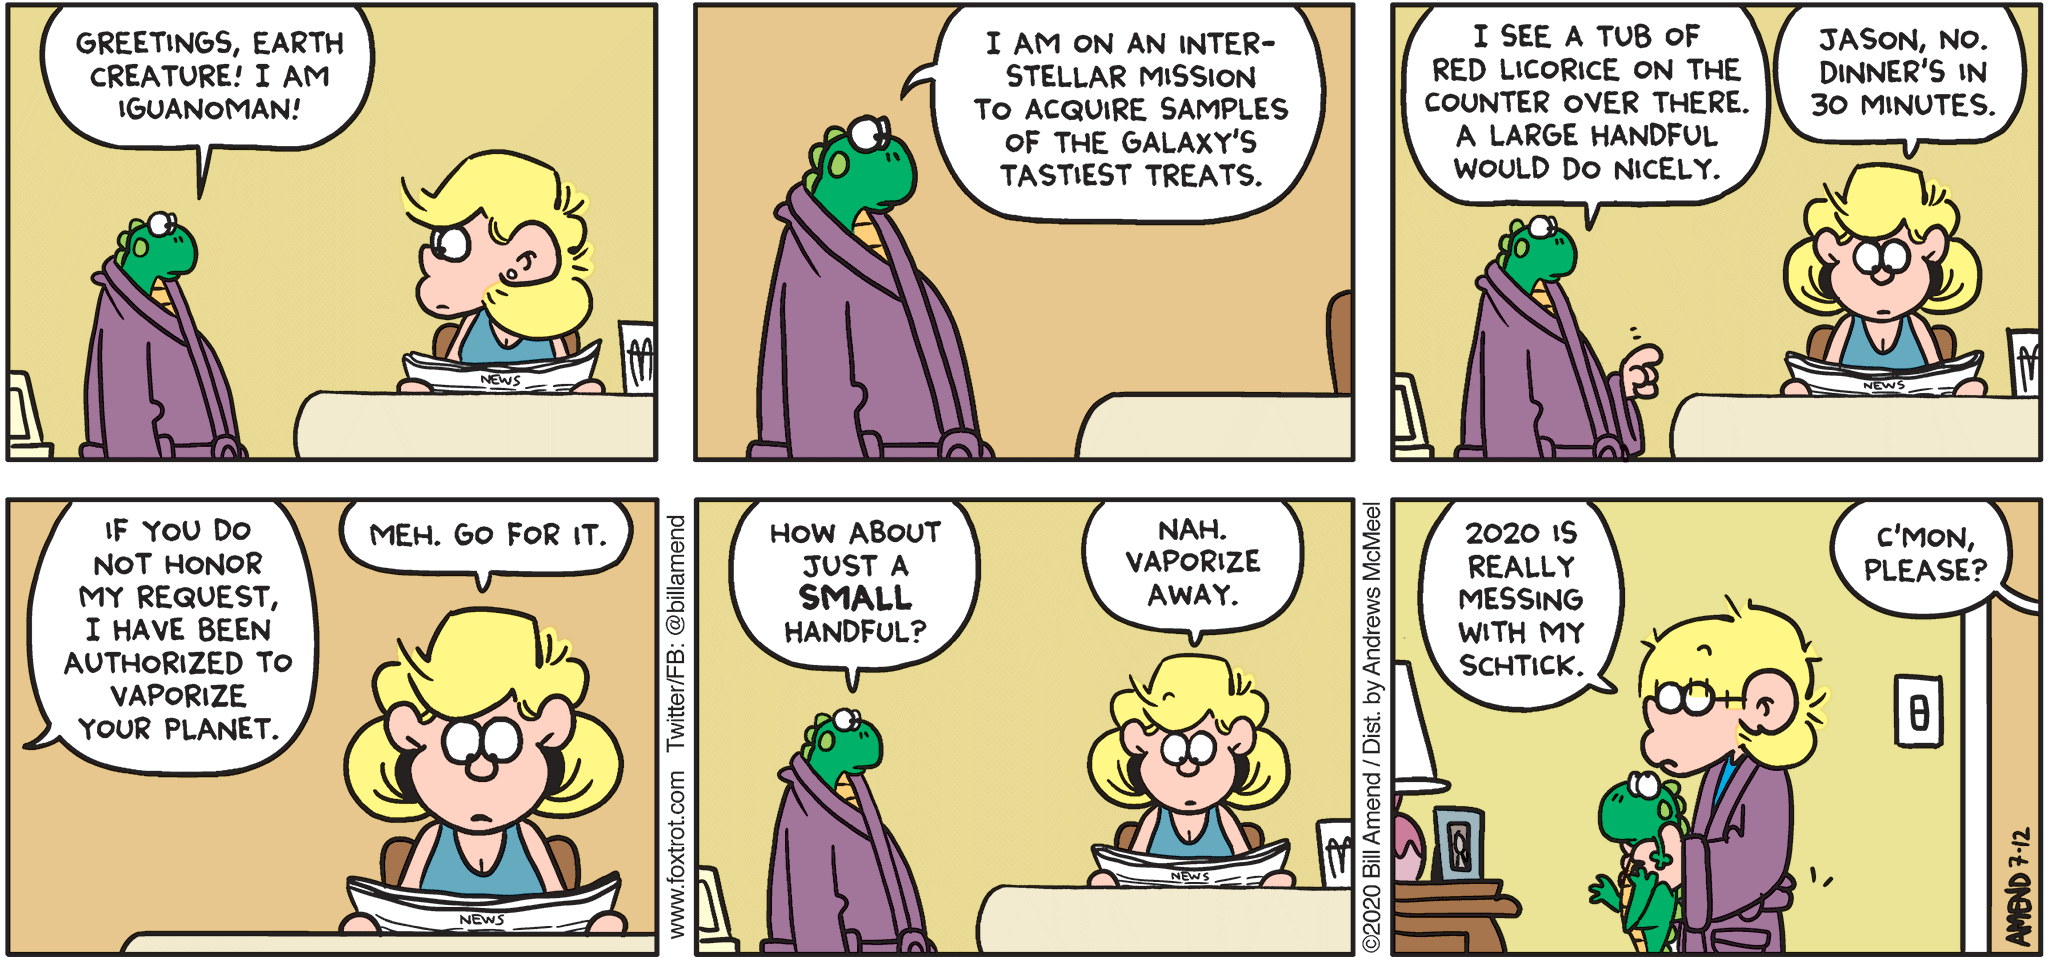 FoxTrot comic strip by Bill Amend - "Iguanoman 2020" published July 12, 2020 - Iguanoman: Greetings, Earth creature! I'm Iguanoman! I'm on an interstellar mission to acquire samples of the galaxy's tastiest treats. I see a tub of red licorice on the counter over there. A large handful would do nicely. Andy: Jason, No. Dinner's in 30 minutes. Iguanoman: If you do not honor my request, I have authorized to vaporize your planet. Andy: Meh, go for it. Iguanoman: How about just a small handful. Andy: Nah. Vaporize away. Jason: 2020 is really messing with my schtick. Andy: C'mon, please?